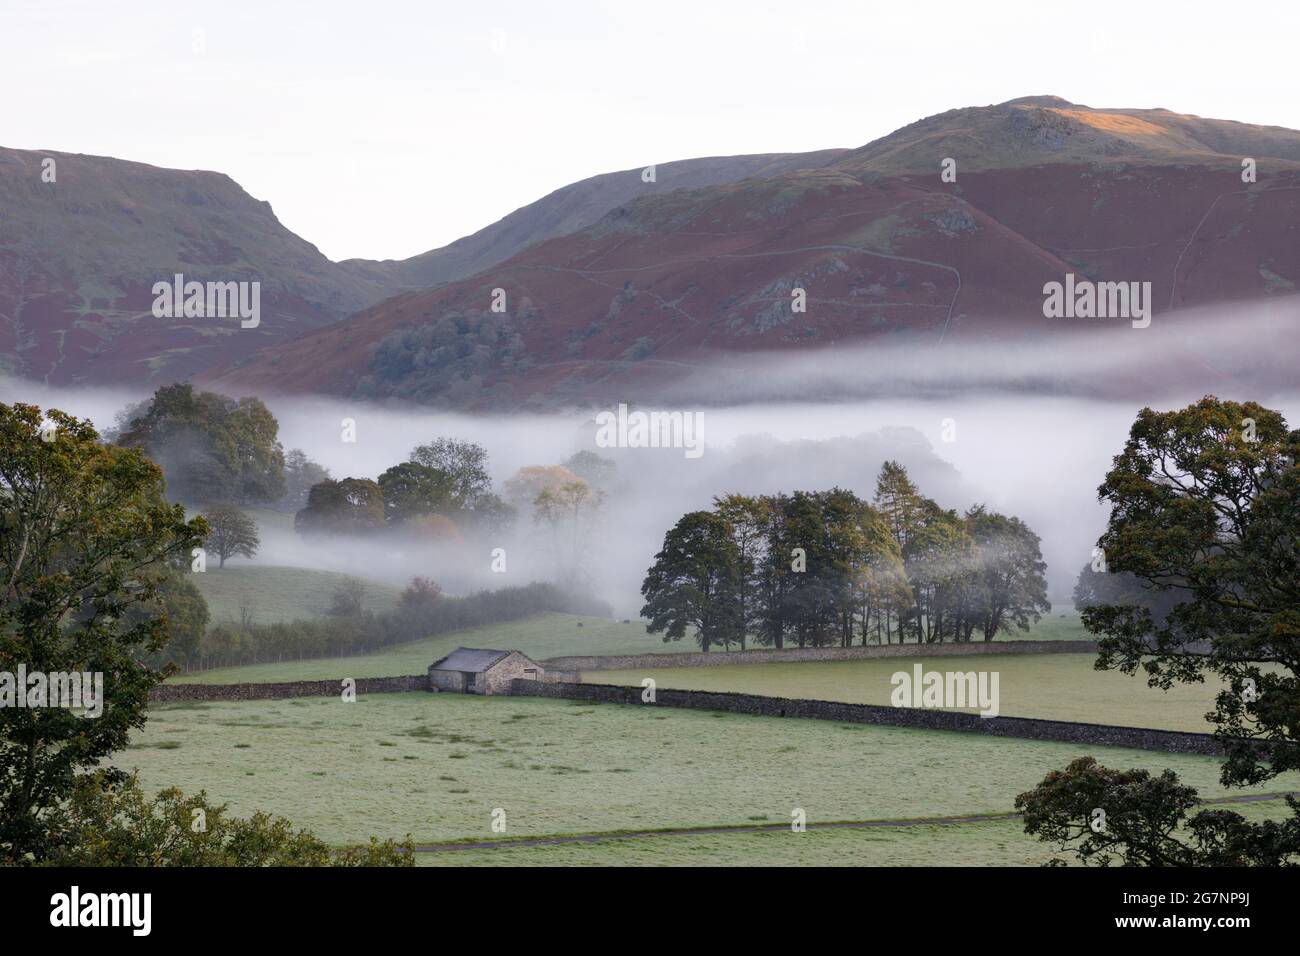 Grasmere, Cumbria, UK, September 29th 2020: Traditional stone barn and walls surrounded by trees and morning mist. Rydal Fell looms in the background. Stock Photo